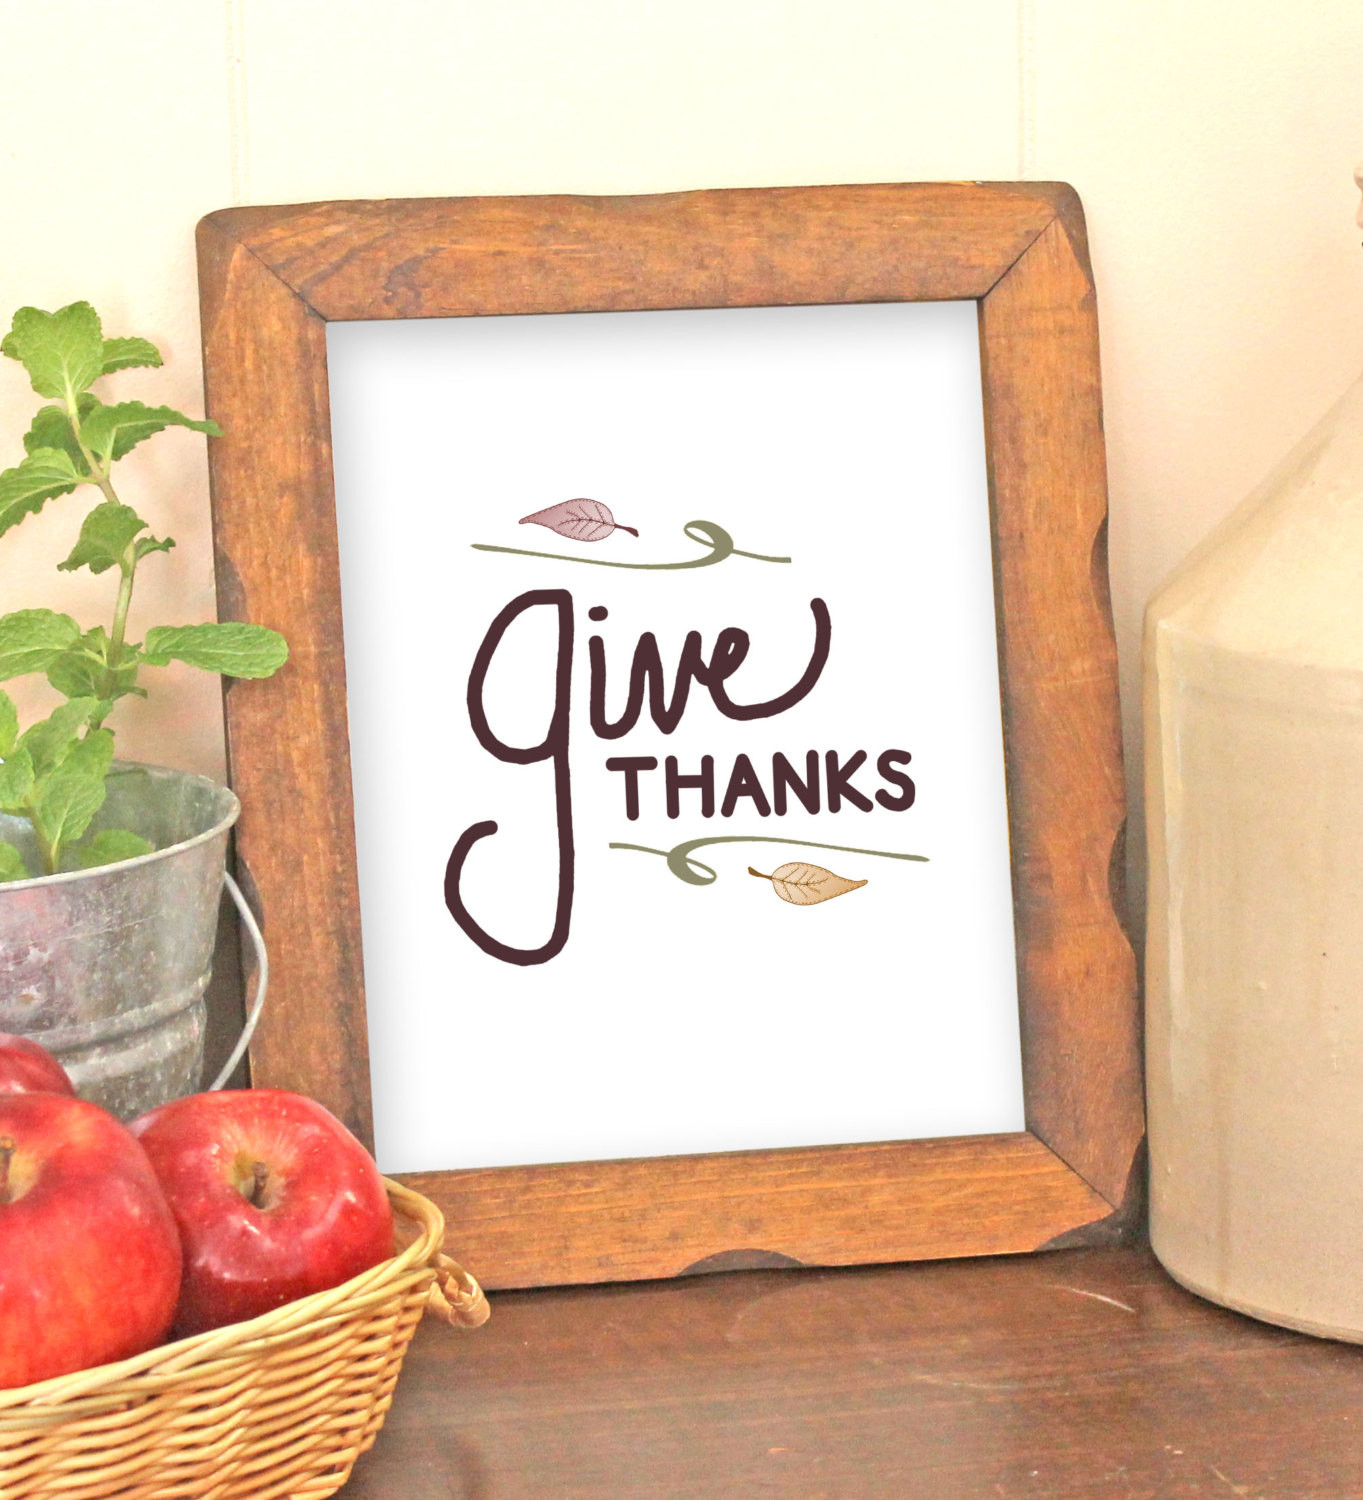 Thanksgiving Wall Art
 Thanksgiving Wall Art Printable Give Thanks by VLHamlinDesign